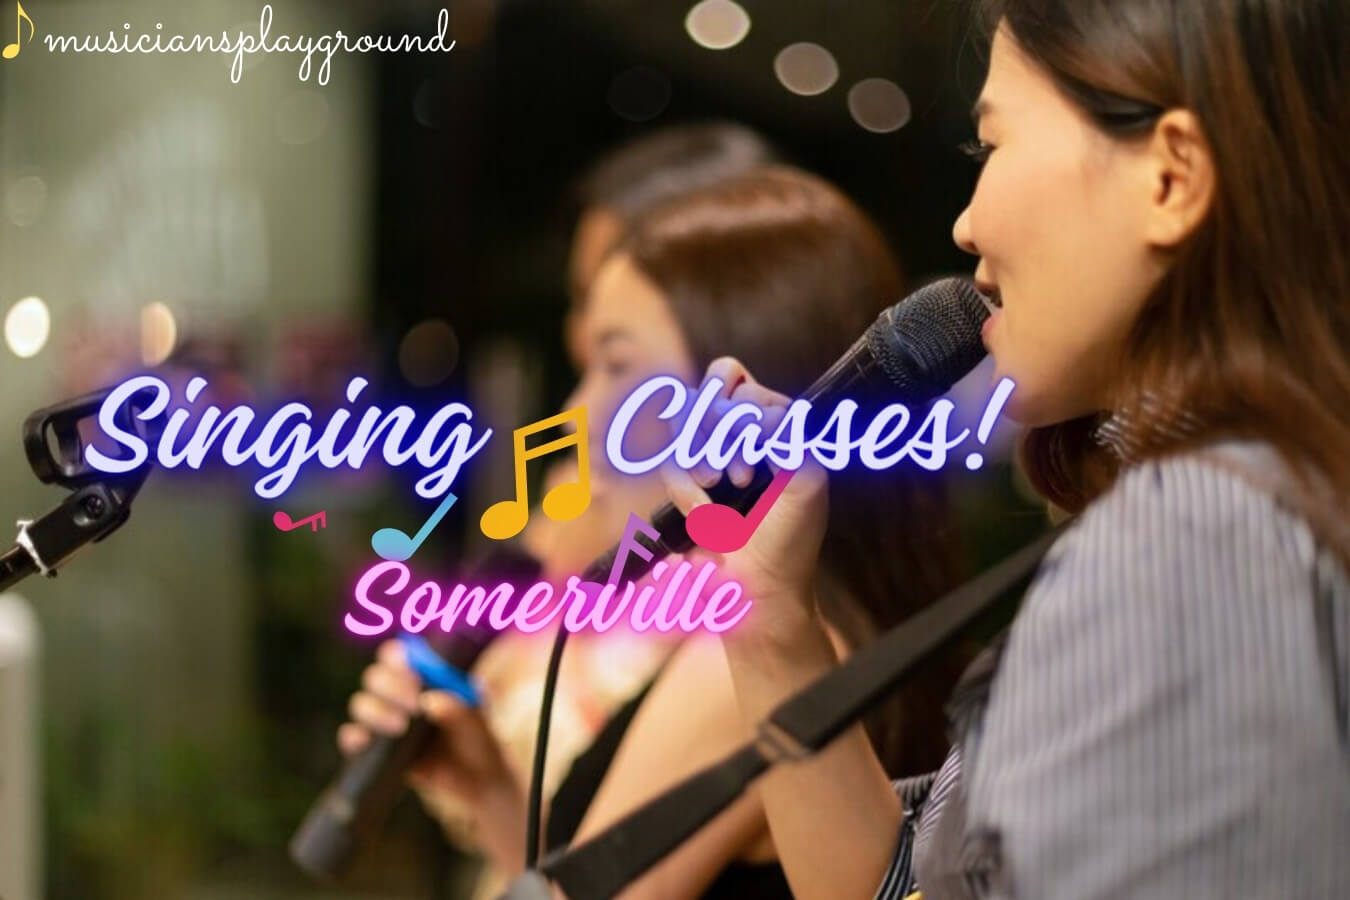 Professional Singing Instruction in Somerville, Massachusetts: Singing Classes, Vocal Lessons, and Voice Training